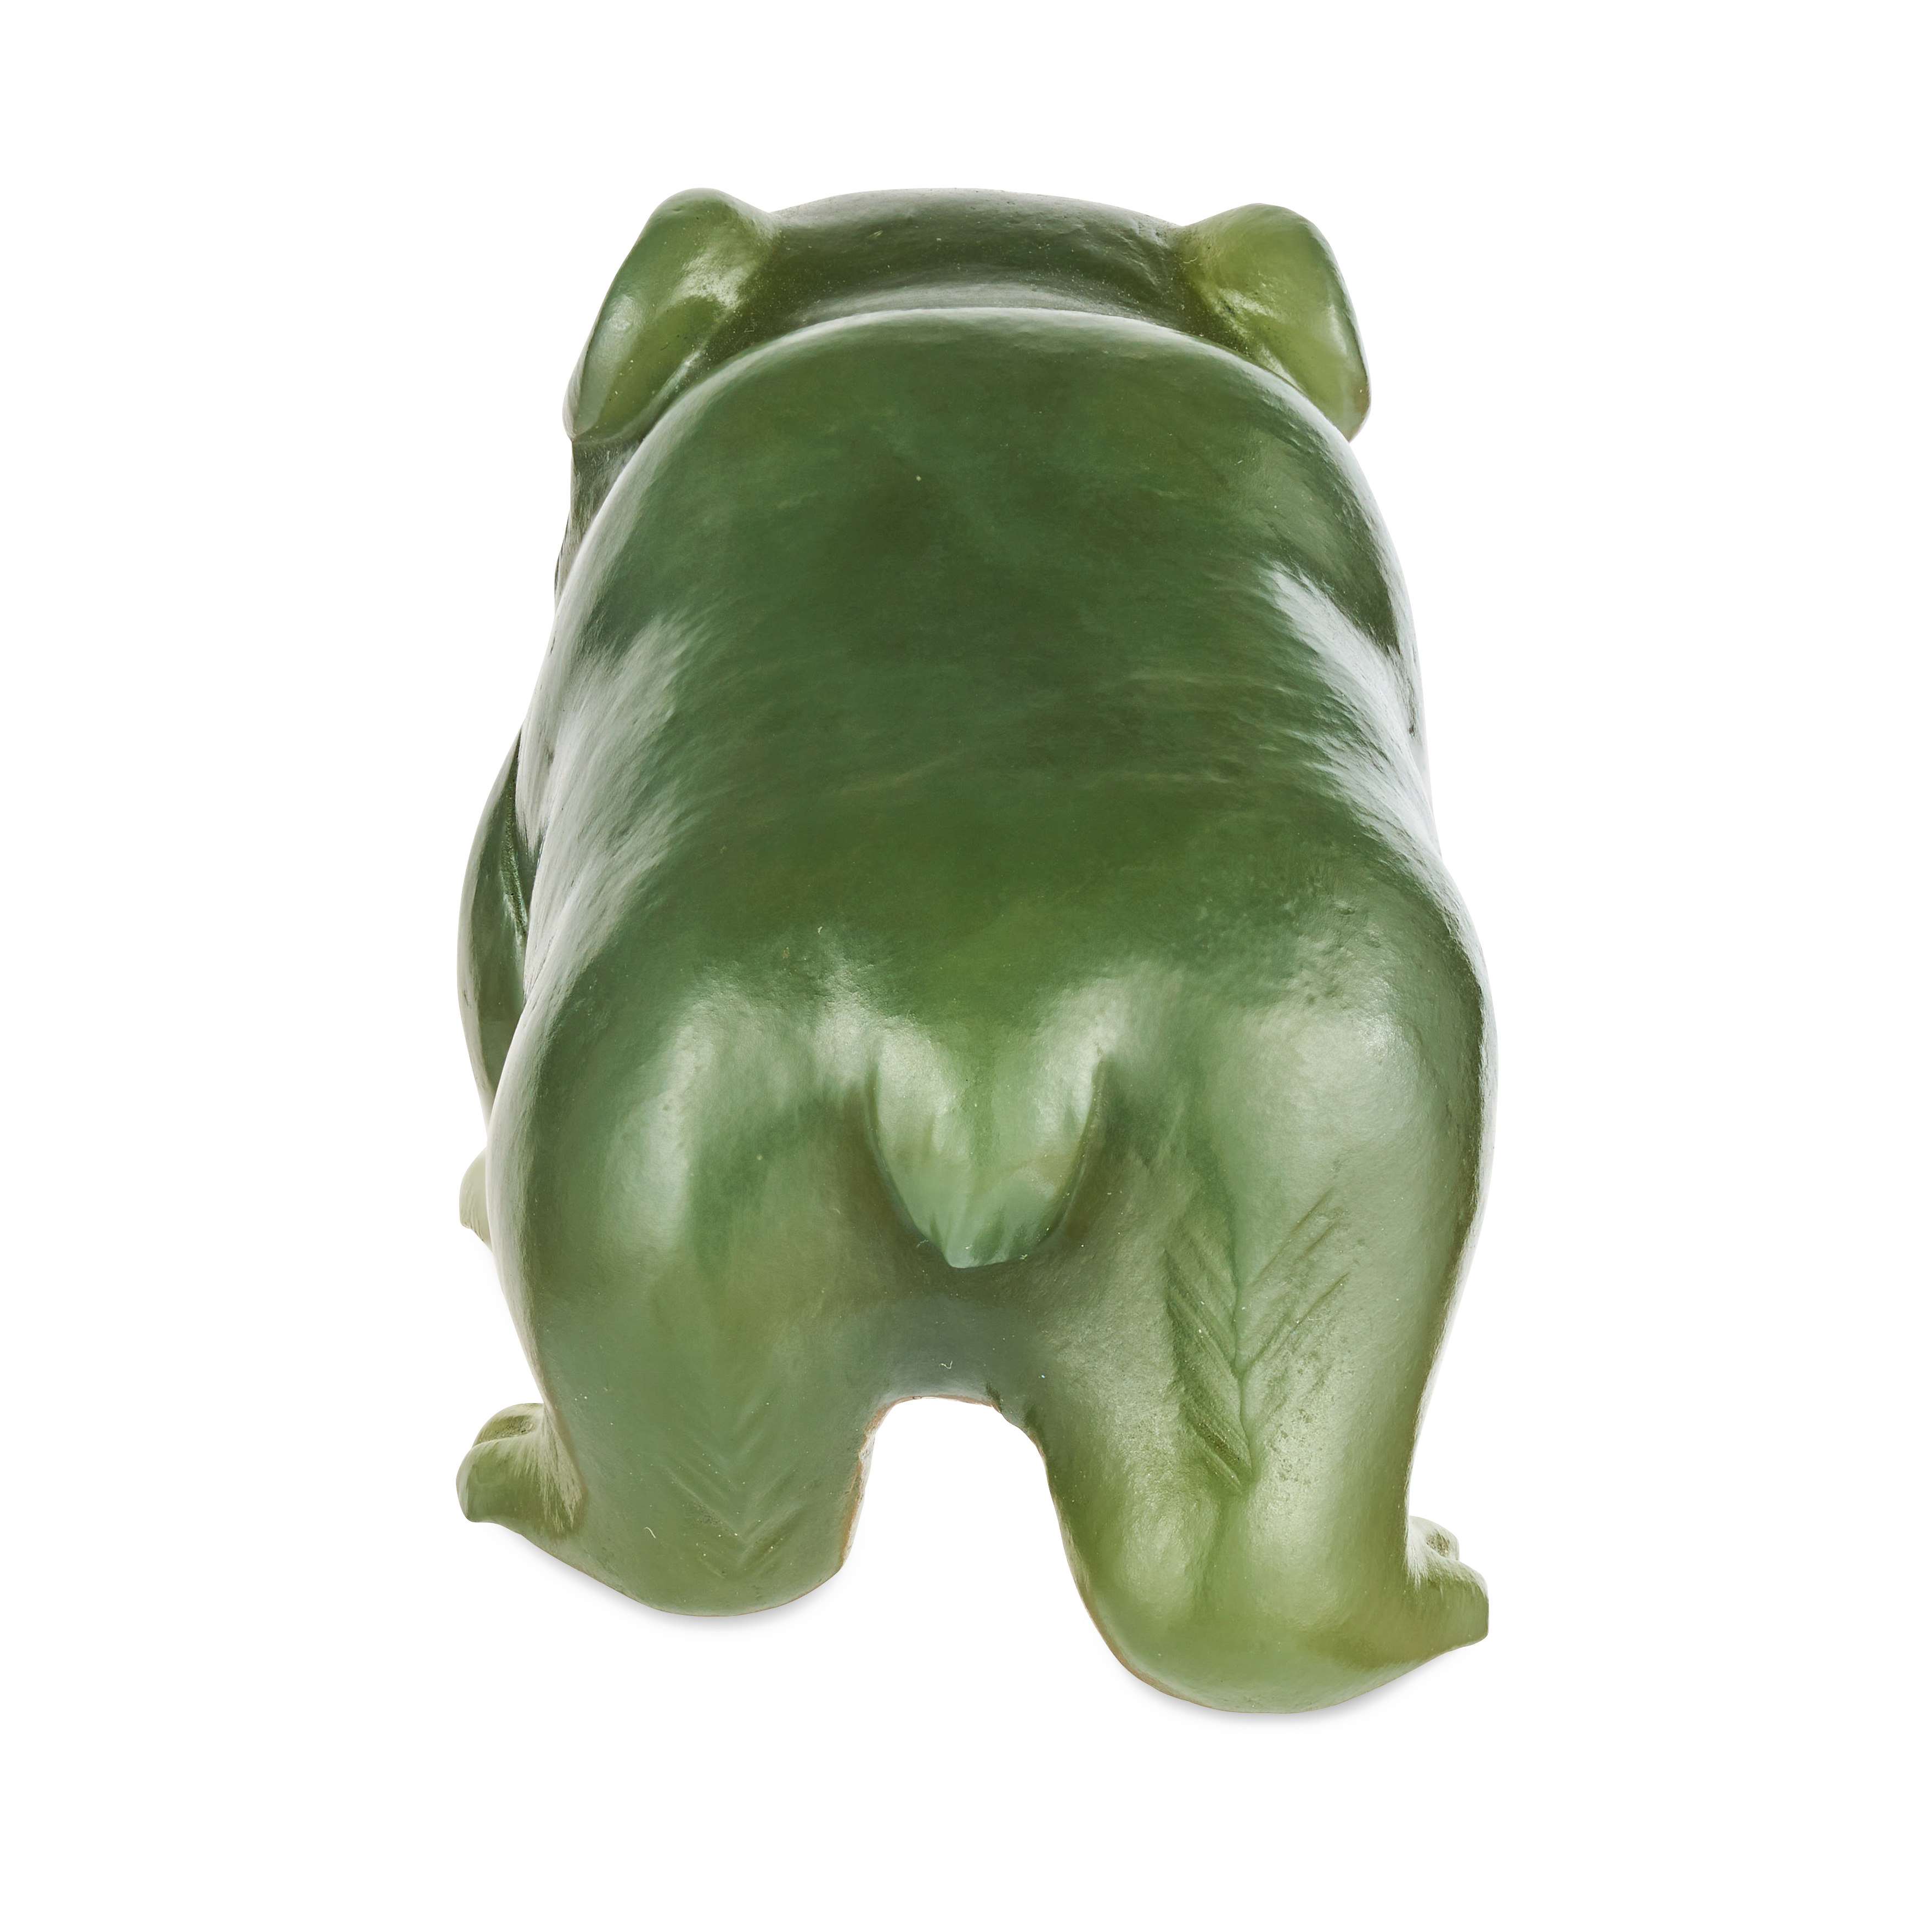 FABERGE, A JEWELLED NEPHRITE STUDY OF A BEAR, CIRCA 1905 - Image 6 of 6